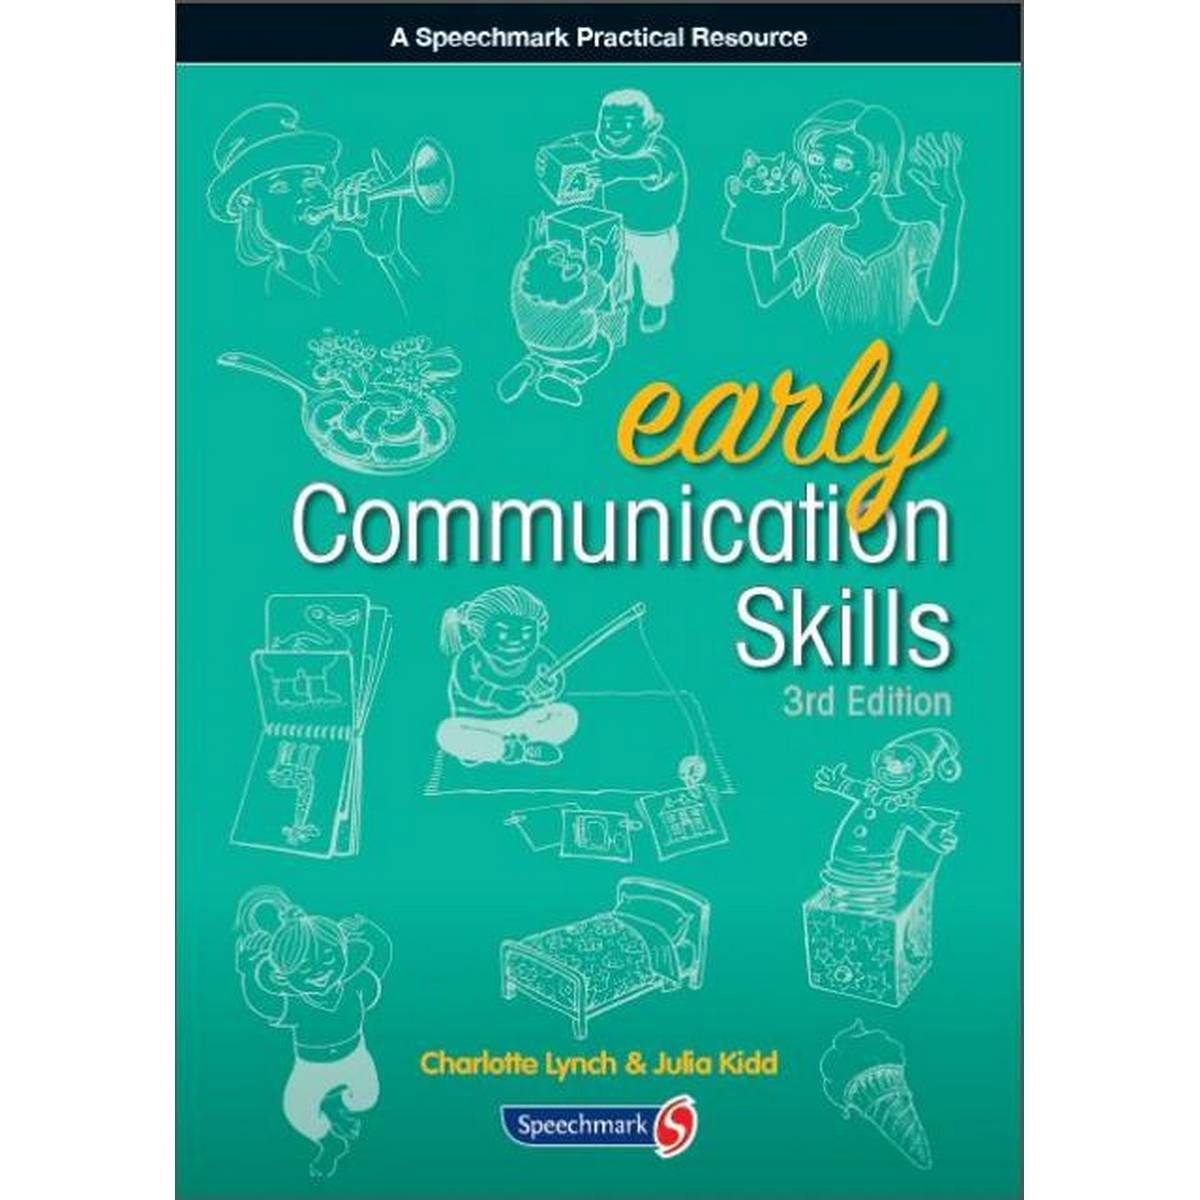 Early Communication Skills - 3rd Edition